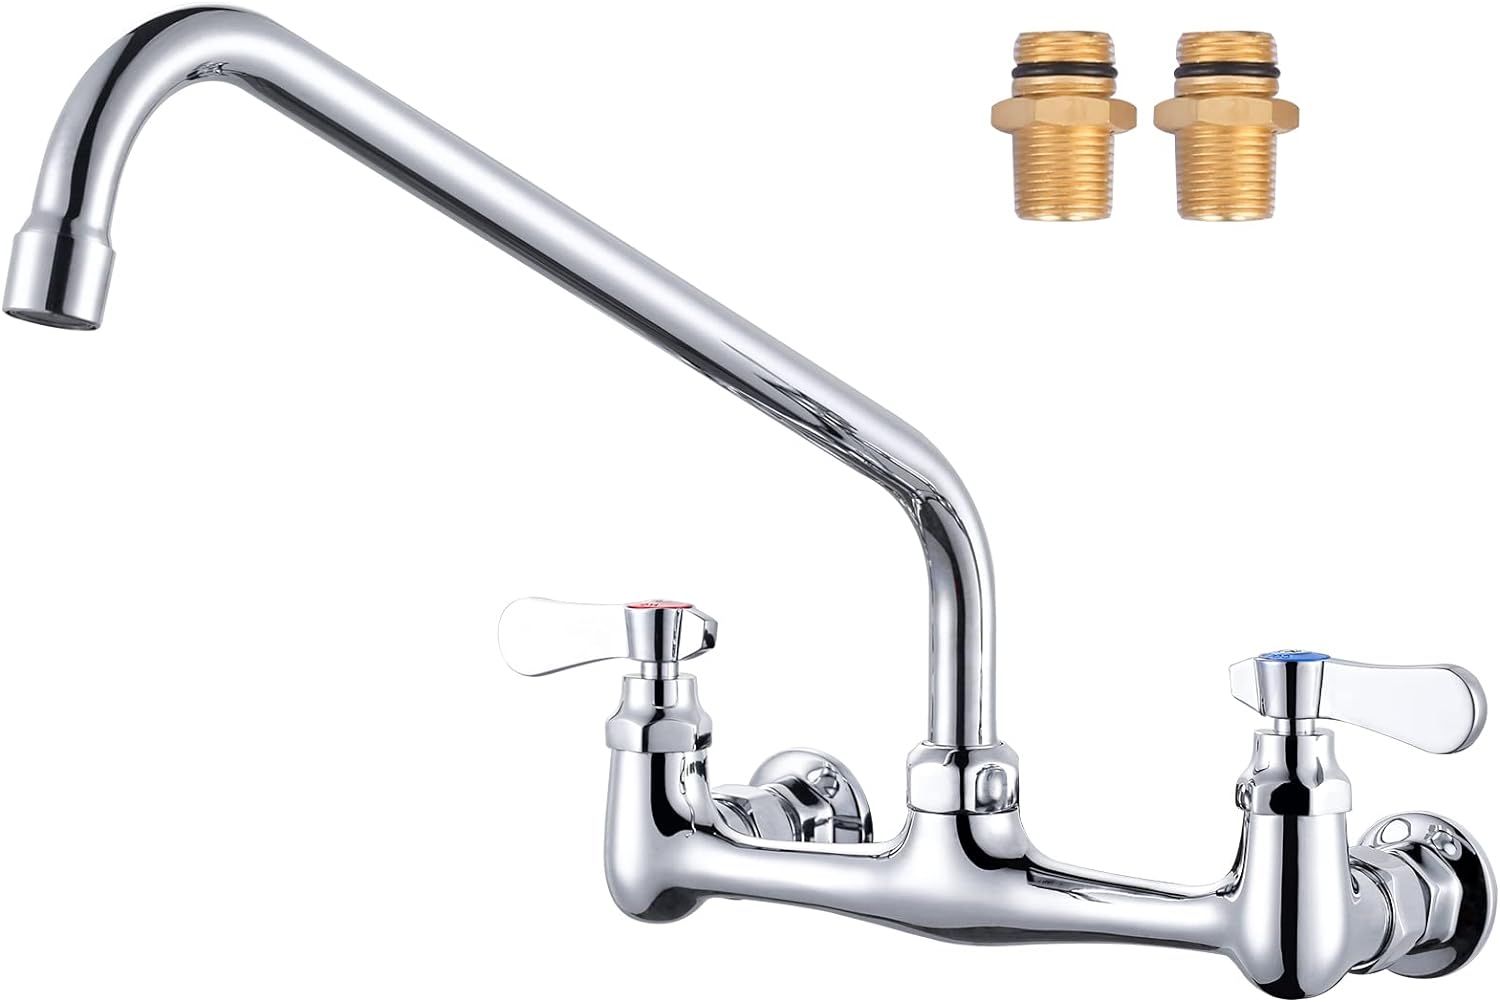 iVIGA Commercial Sink Faucet with 14 in Swivel Spout, 8 in Center Wall Mount Kitchen Faucet, Dual Handles Brass Utility Sink Faucet for Laundry Room Restaurant Compartment Sink, Polish Chrome